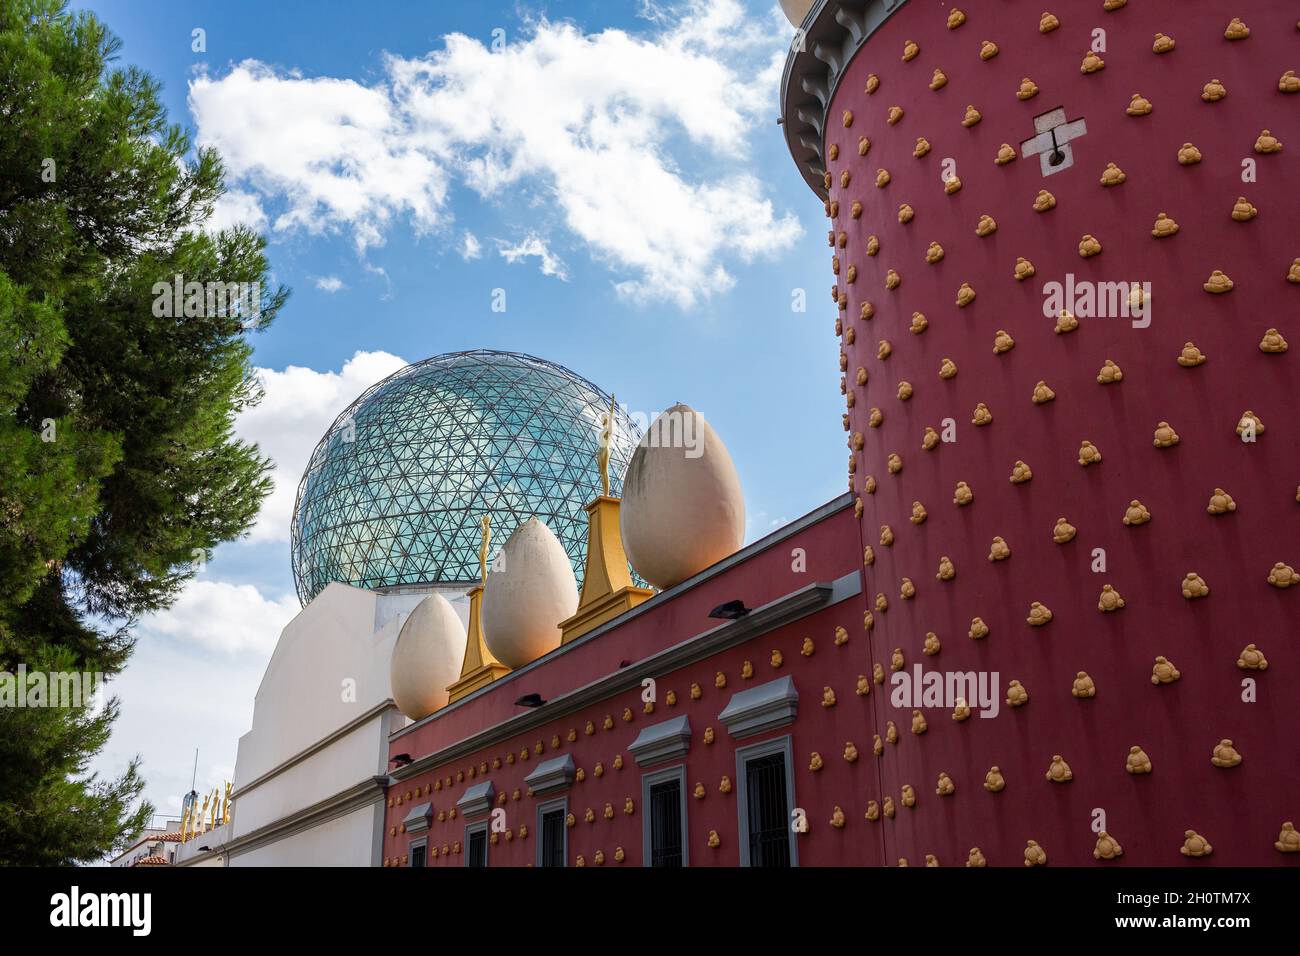 Figueras, Gerona, Spain - September 18, 2021: Dali Theater-Museum exterior facade detail. Museum entirely dedicated to Salvador Dalí. The huge eggs on Stock Photo